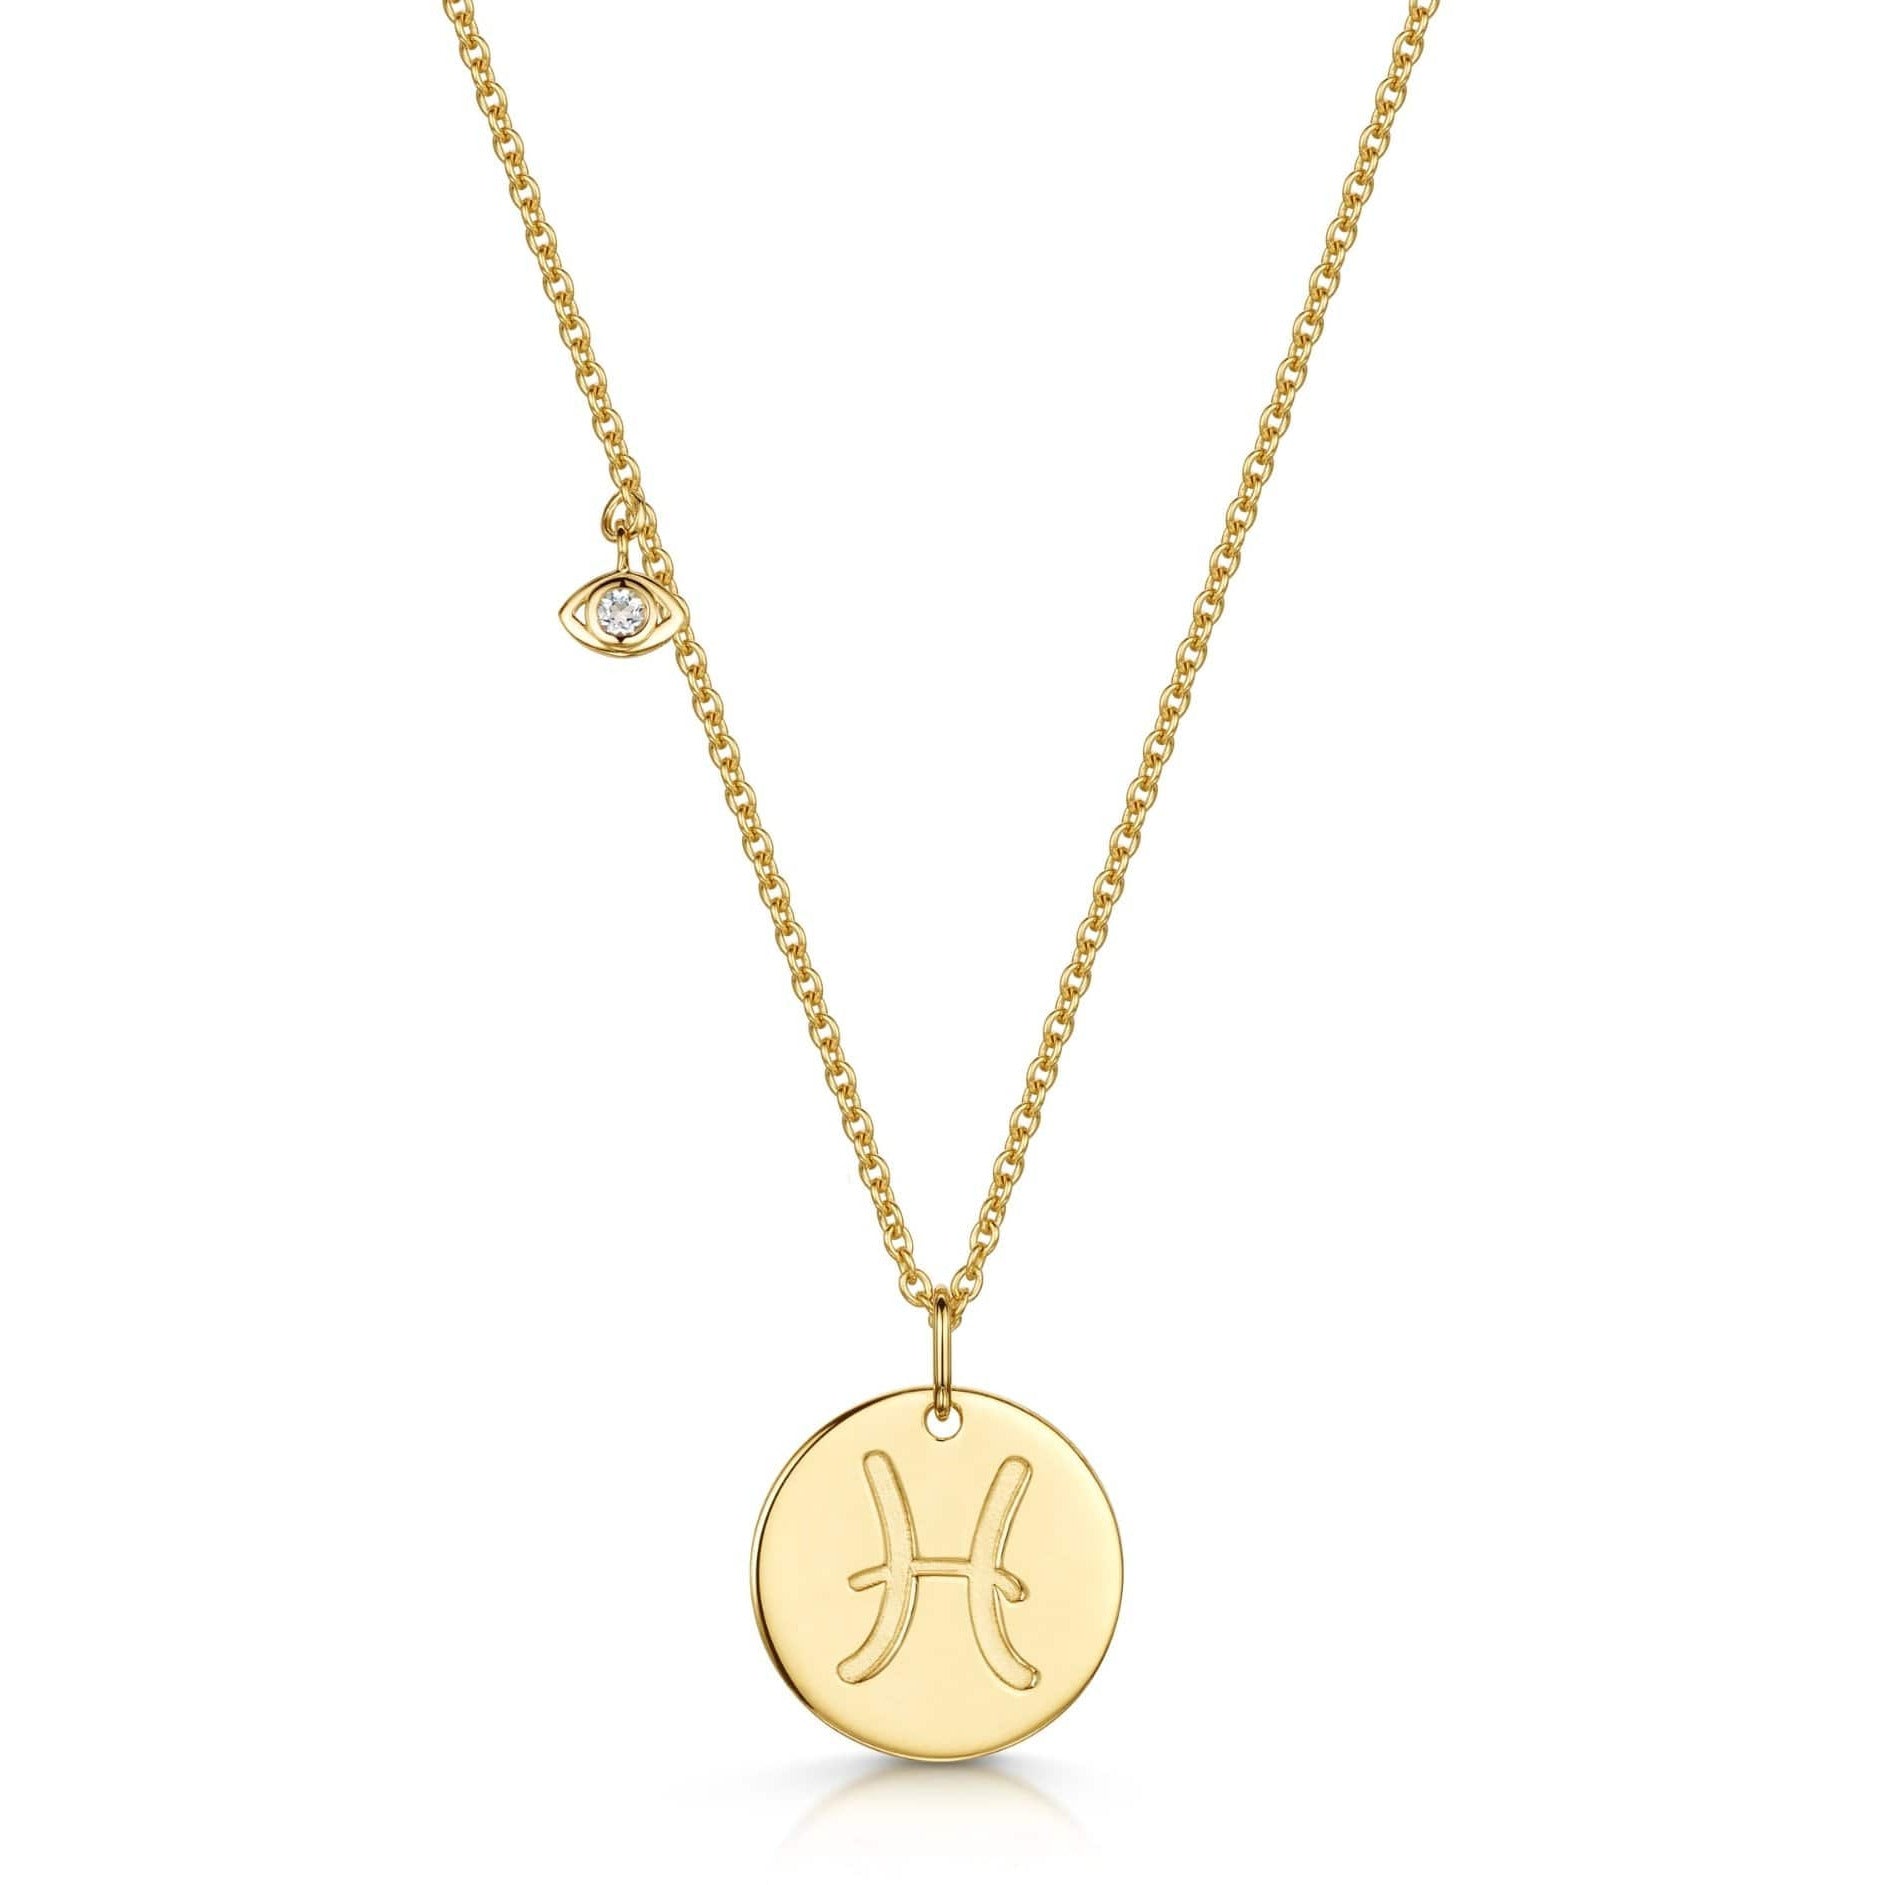 Fervor Montreal Necklace Pisces Double-Sided Zodiac & Constellation Necklace